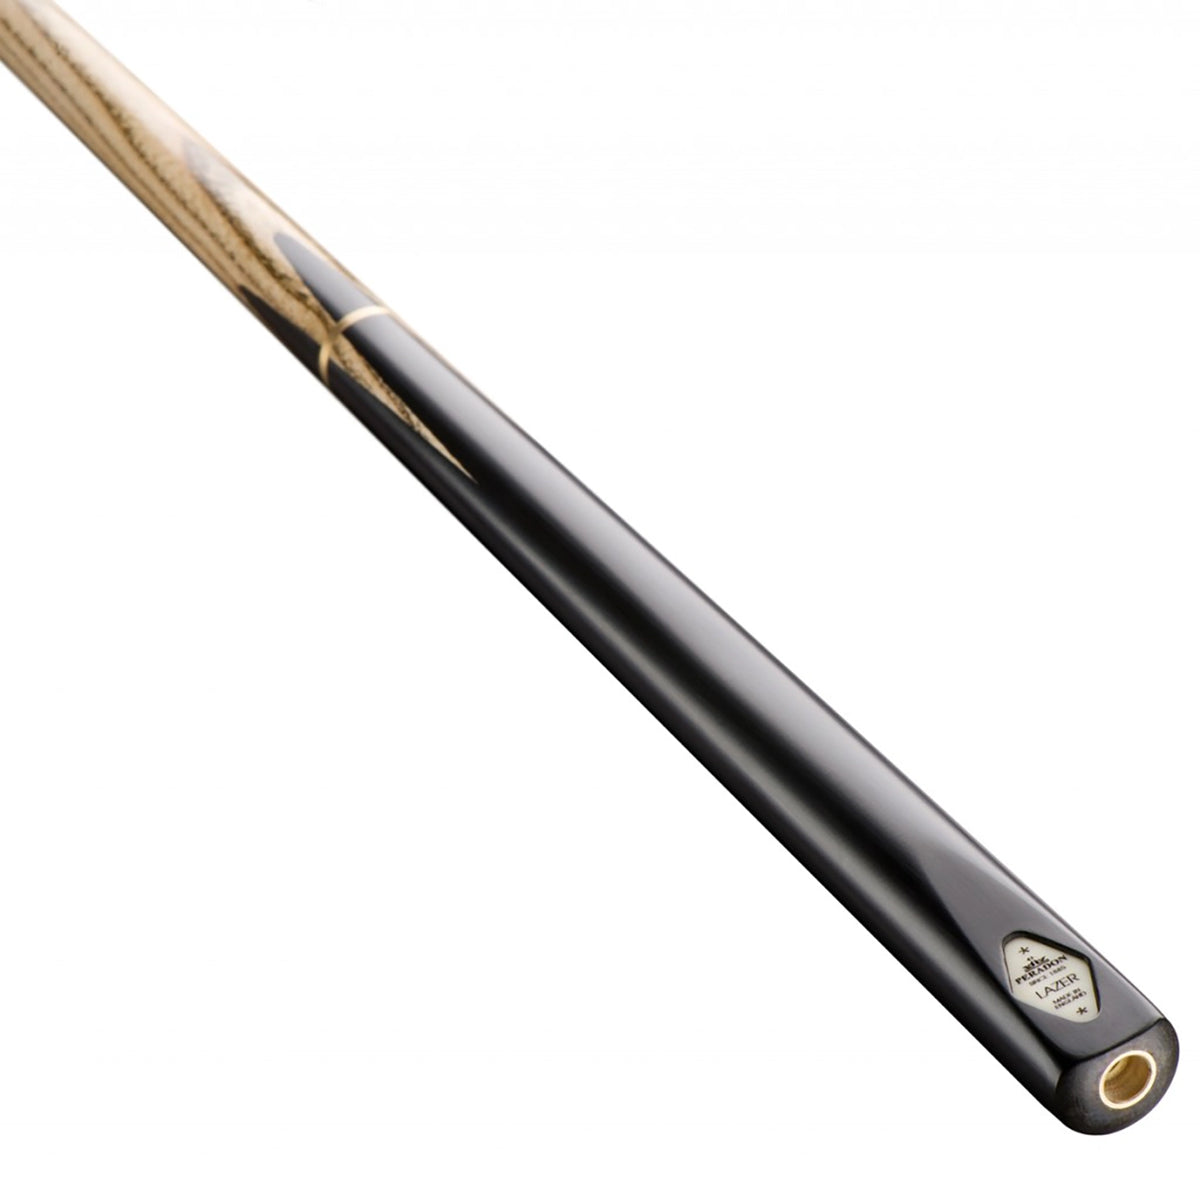 Peradon Lazer 3/4 Jointed Snooker Cue. On angle view